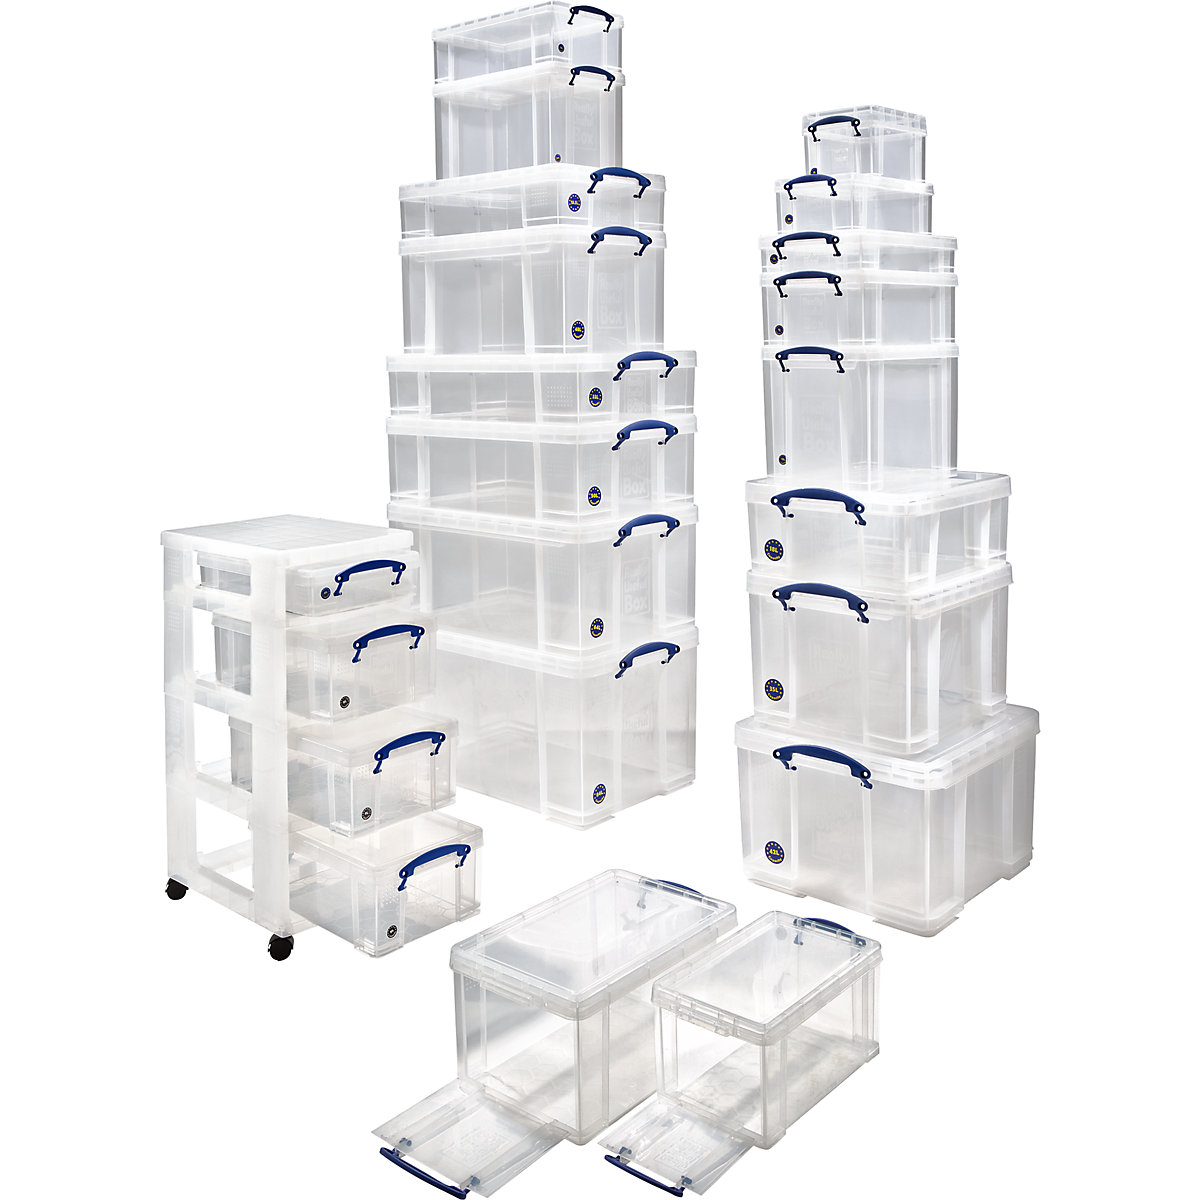 Caja apilable REALLY USEFUL (Imagen del producto 8)-7